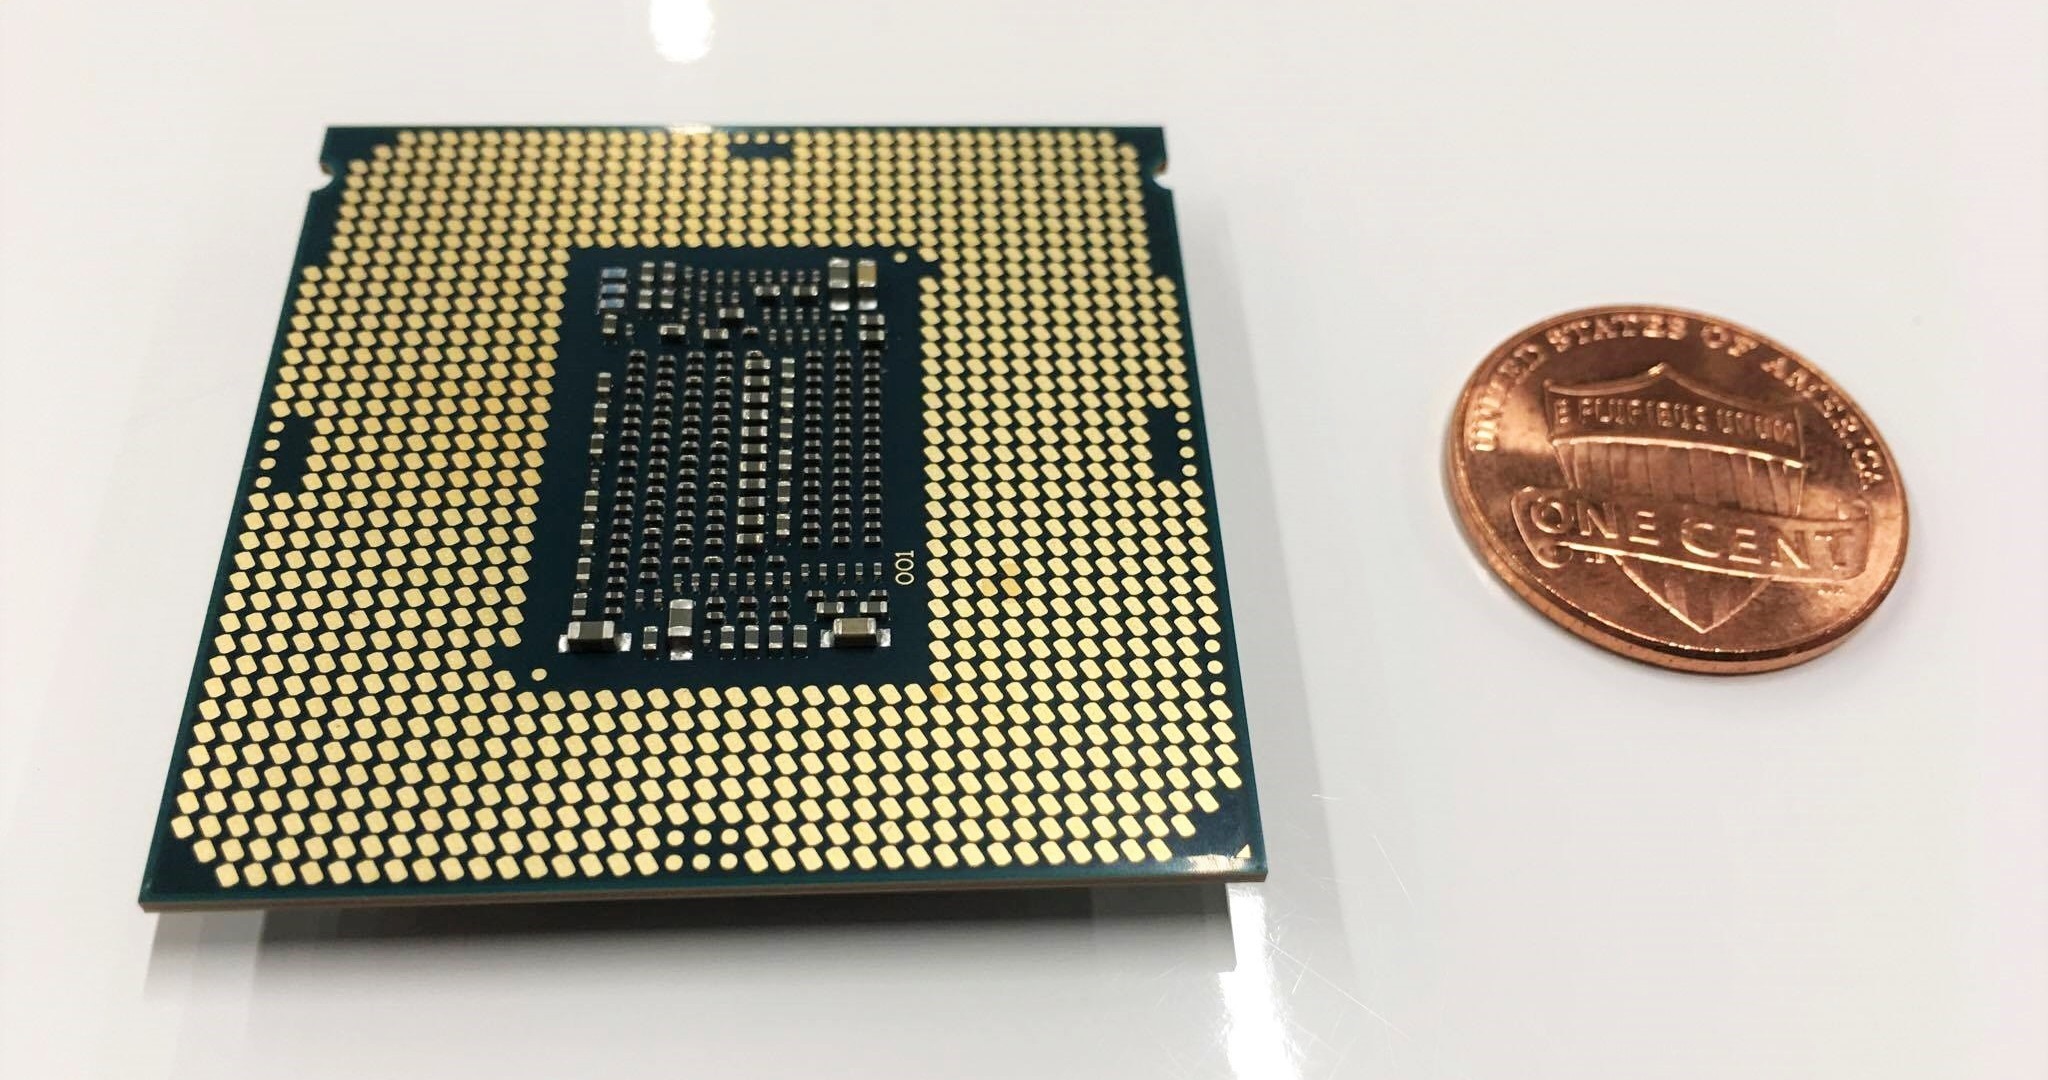 Intel Core i7-8700K CPU Review Roundup: High Praise Across The Internet